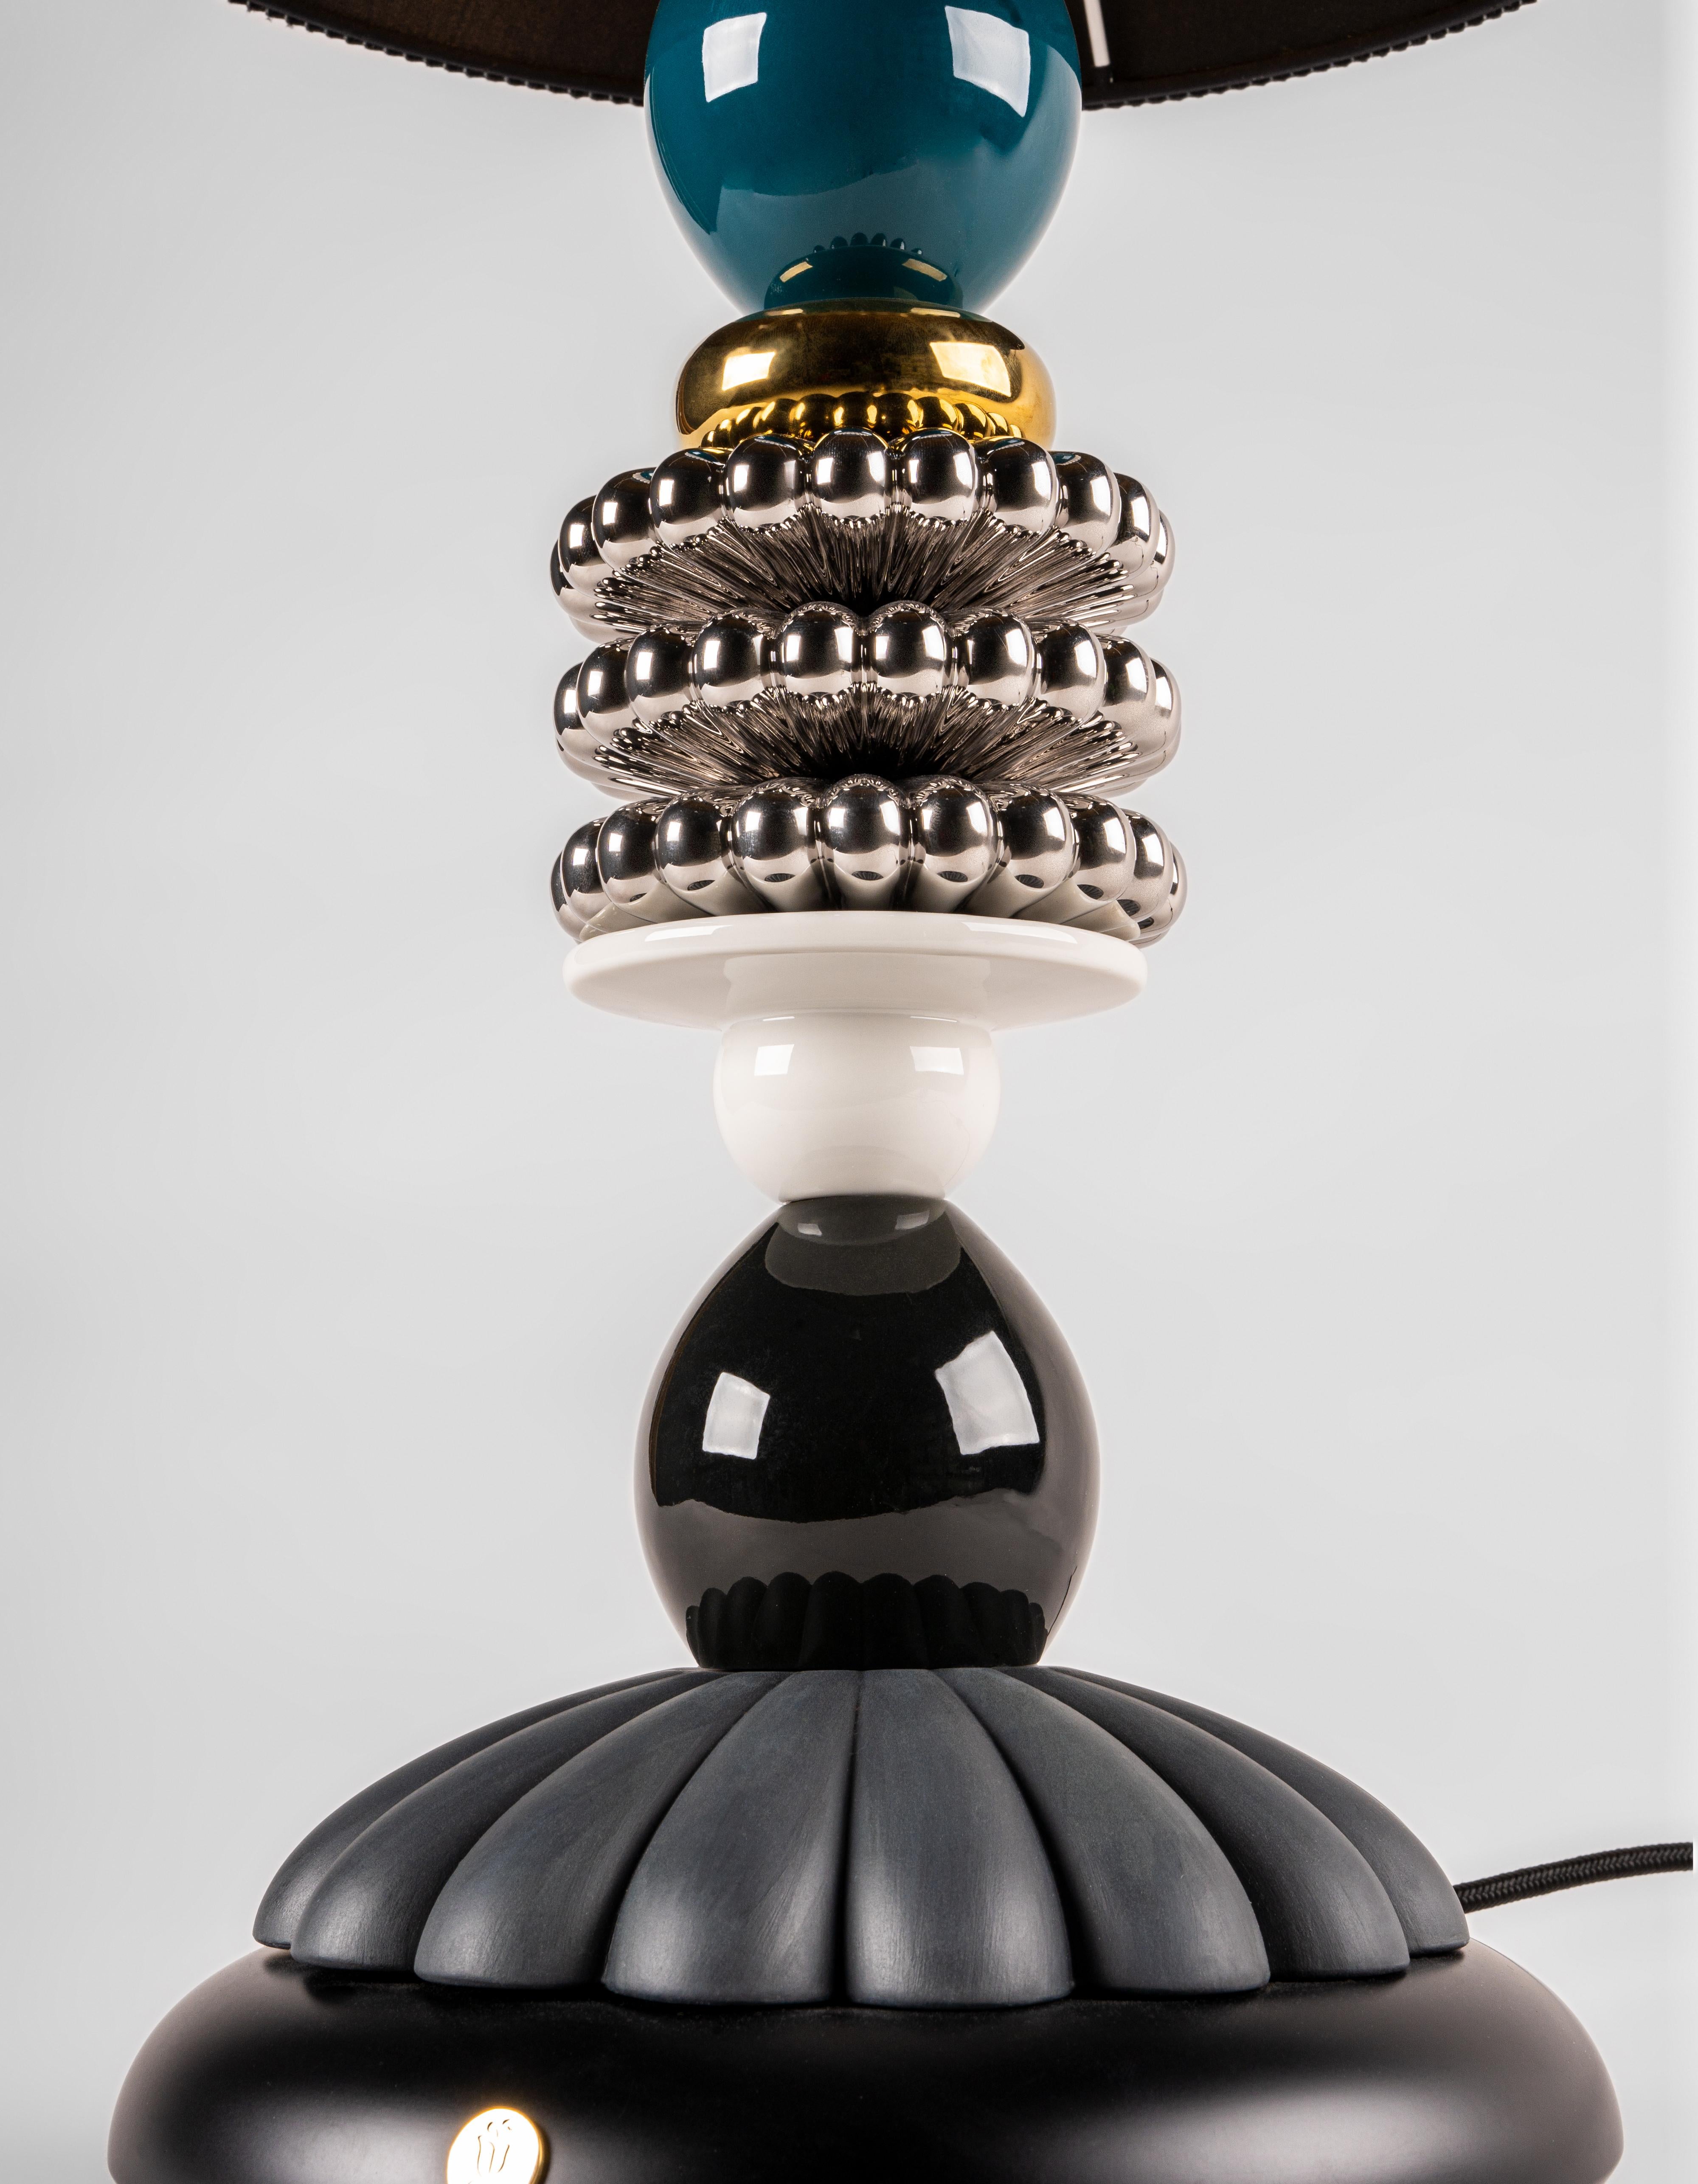 Tabletop lamp from the Firefly collection, taking on a new character in this version designed by the celebrated Mexican interior designer Olga Hanono. Olga Hanono, an interior designer internationally famous in the world of art and architecture,